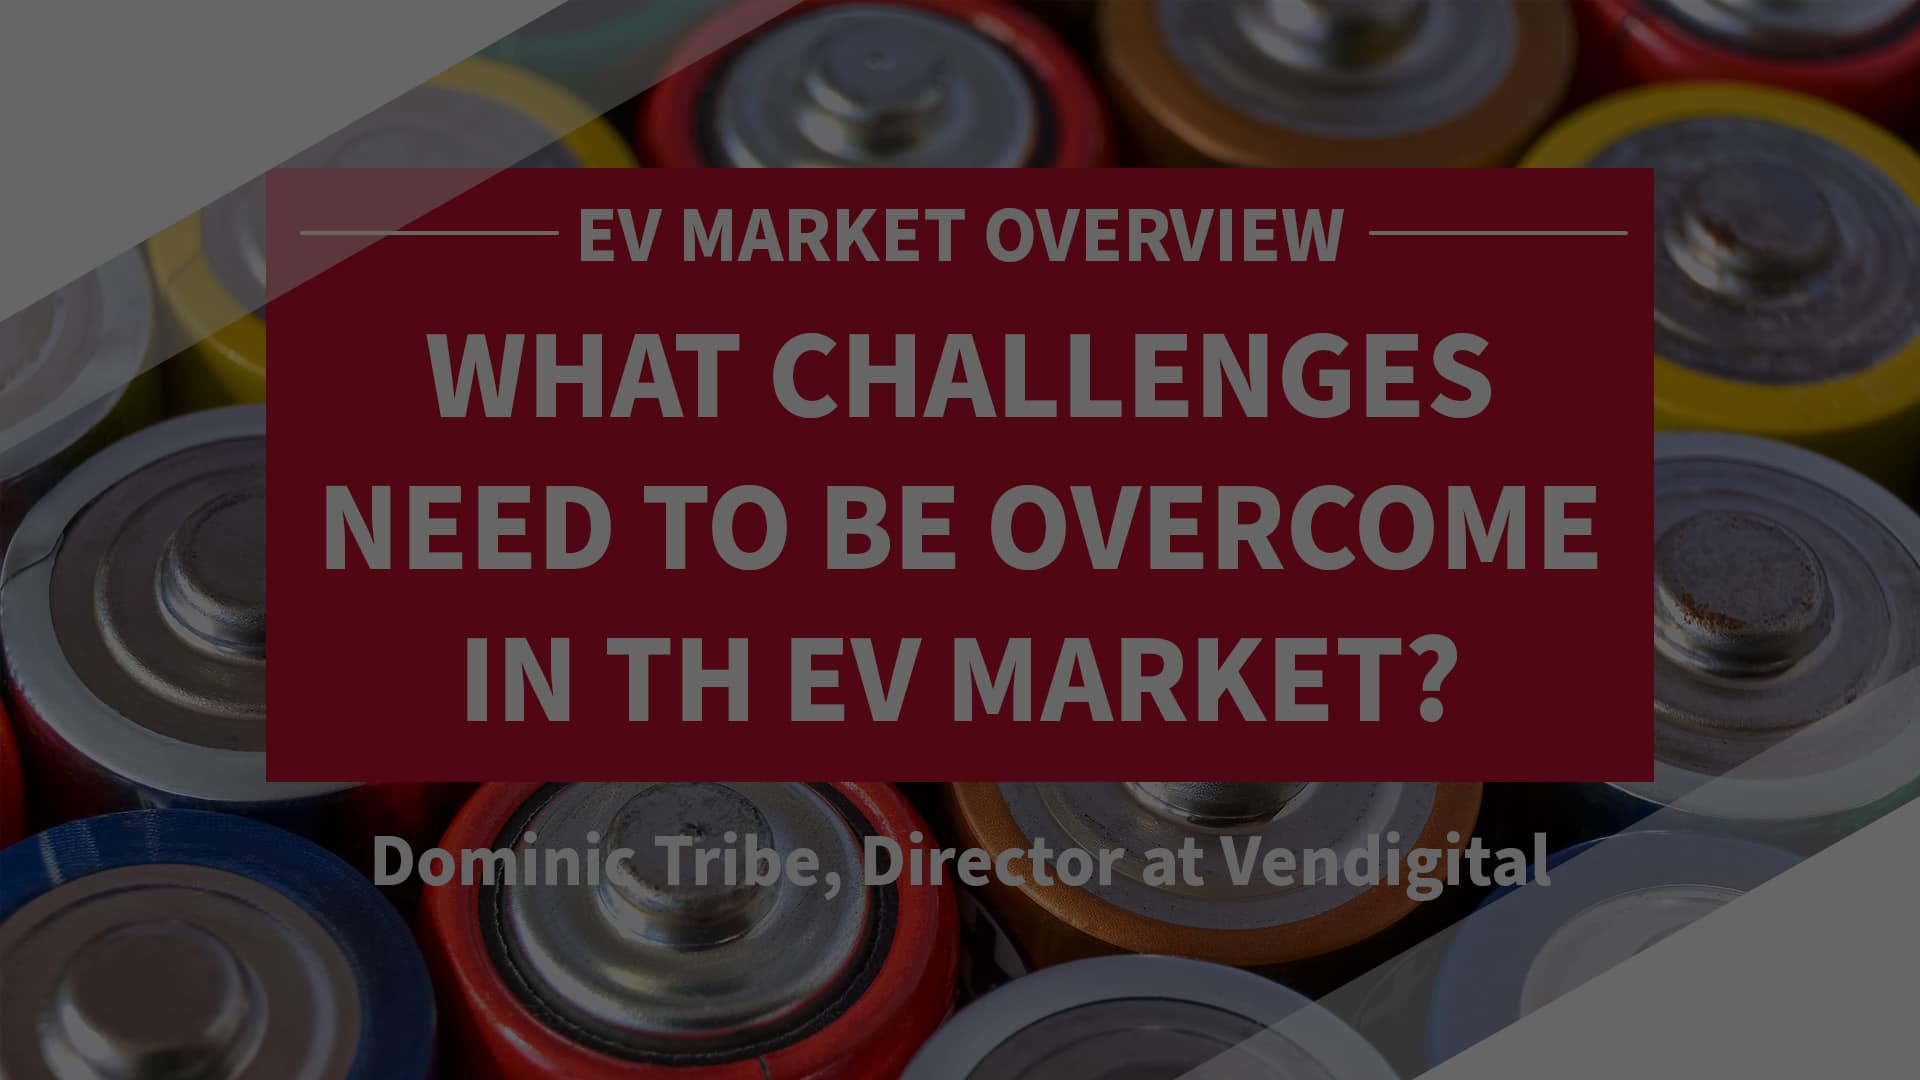 What challenges need to be overcome in the EV market video